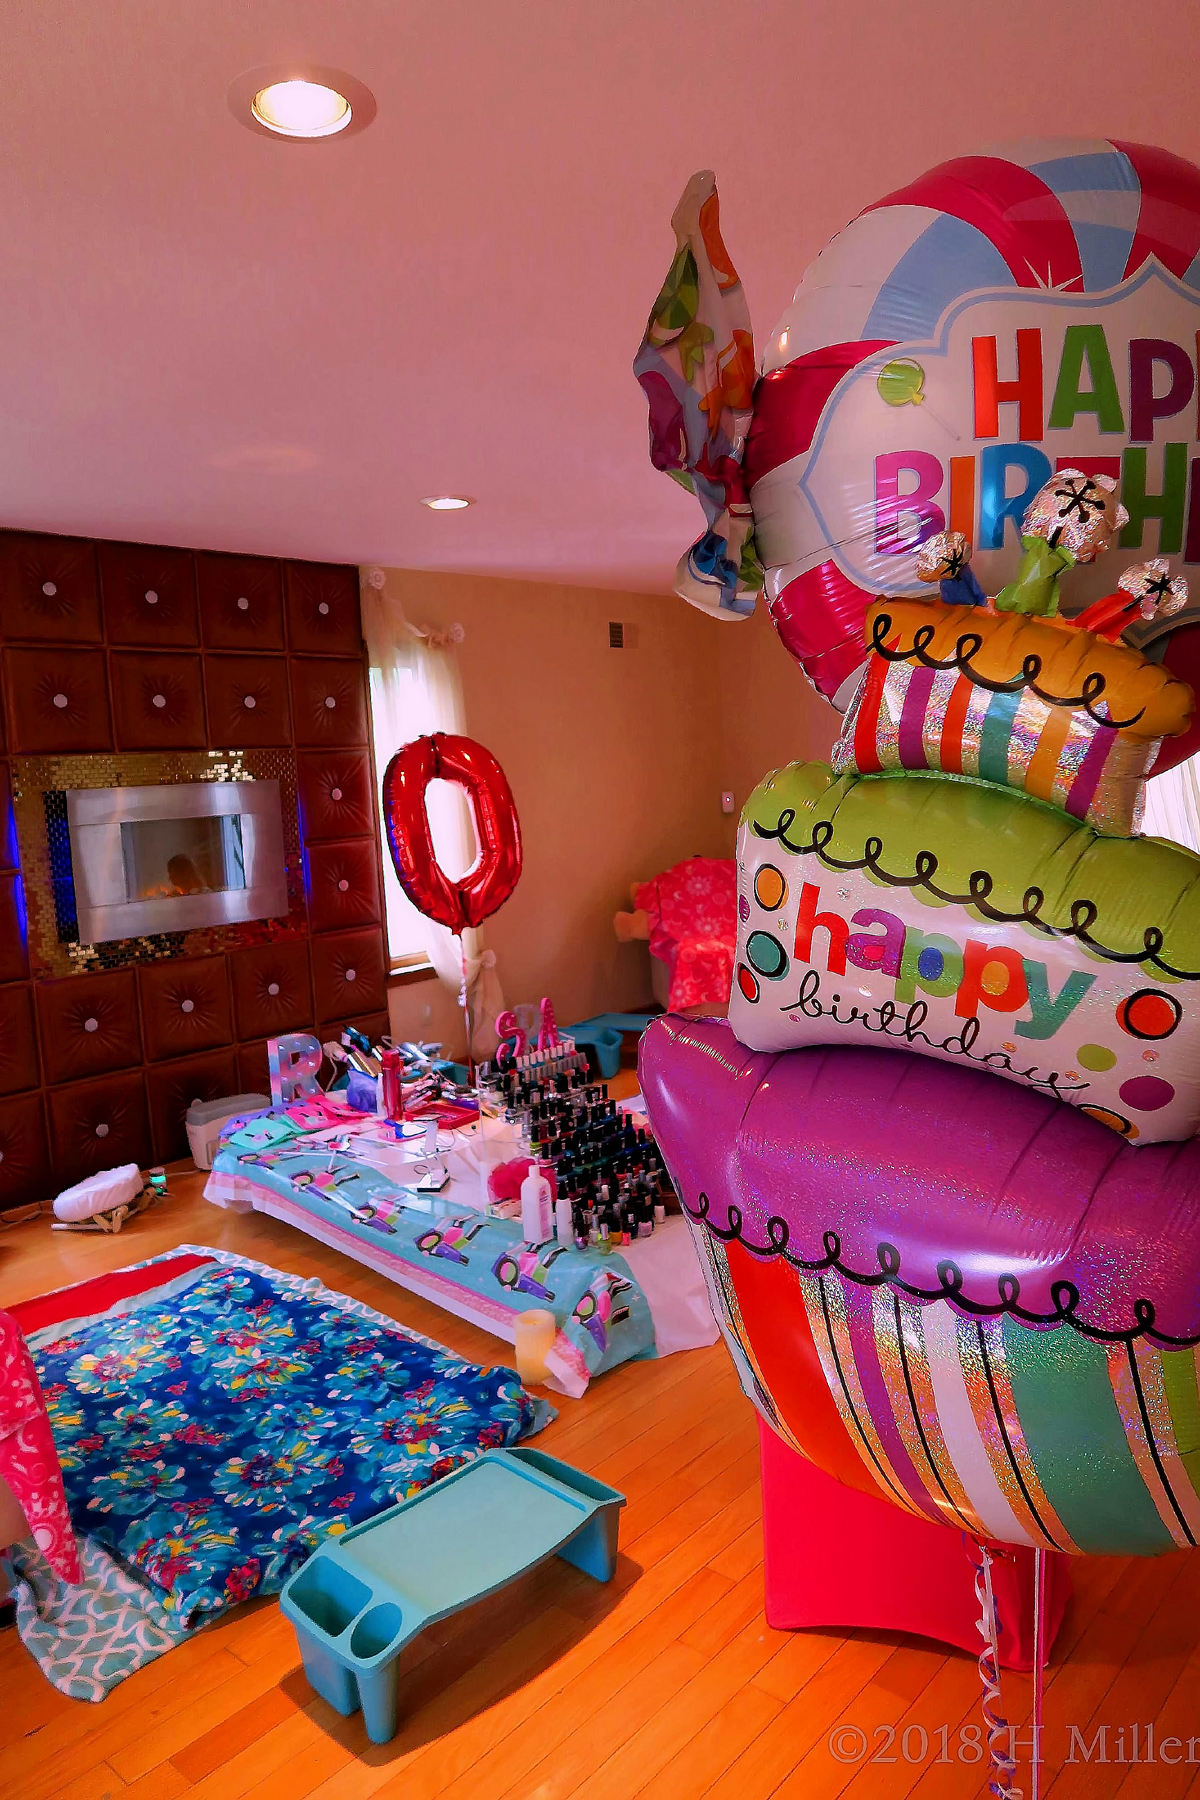 Cute Birthday Balloons Add To The Beauty Of The Spa Party Area. 